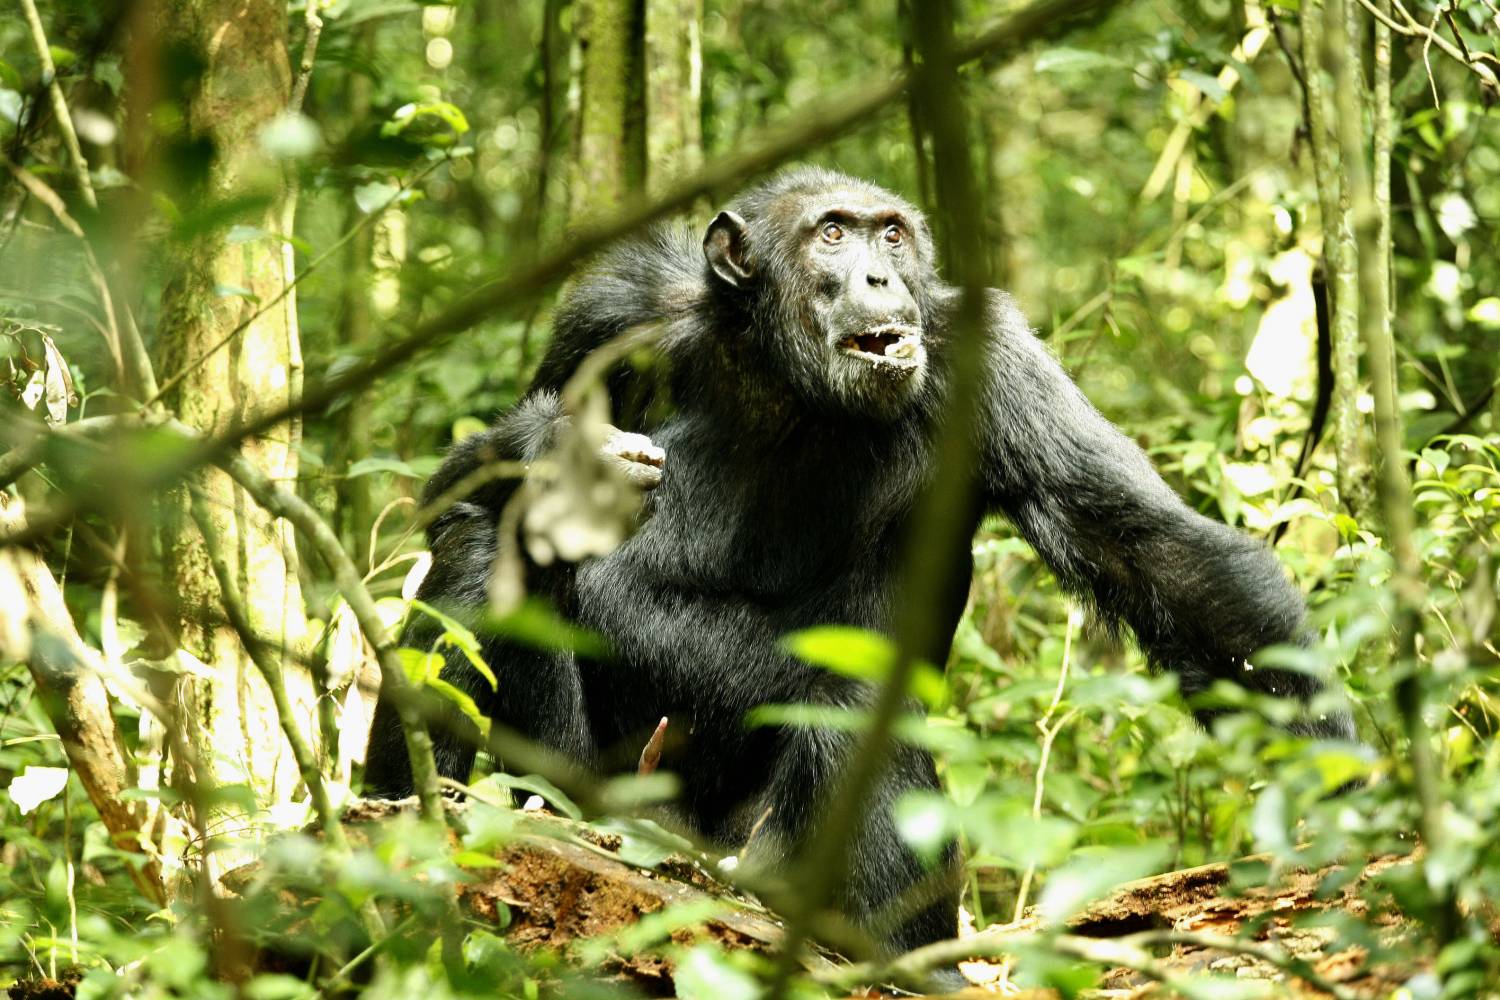 Chimpanzees are natural born killers, study says, and they prefer mob violence